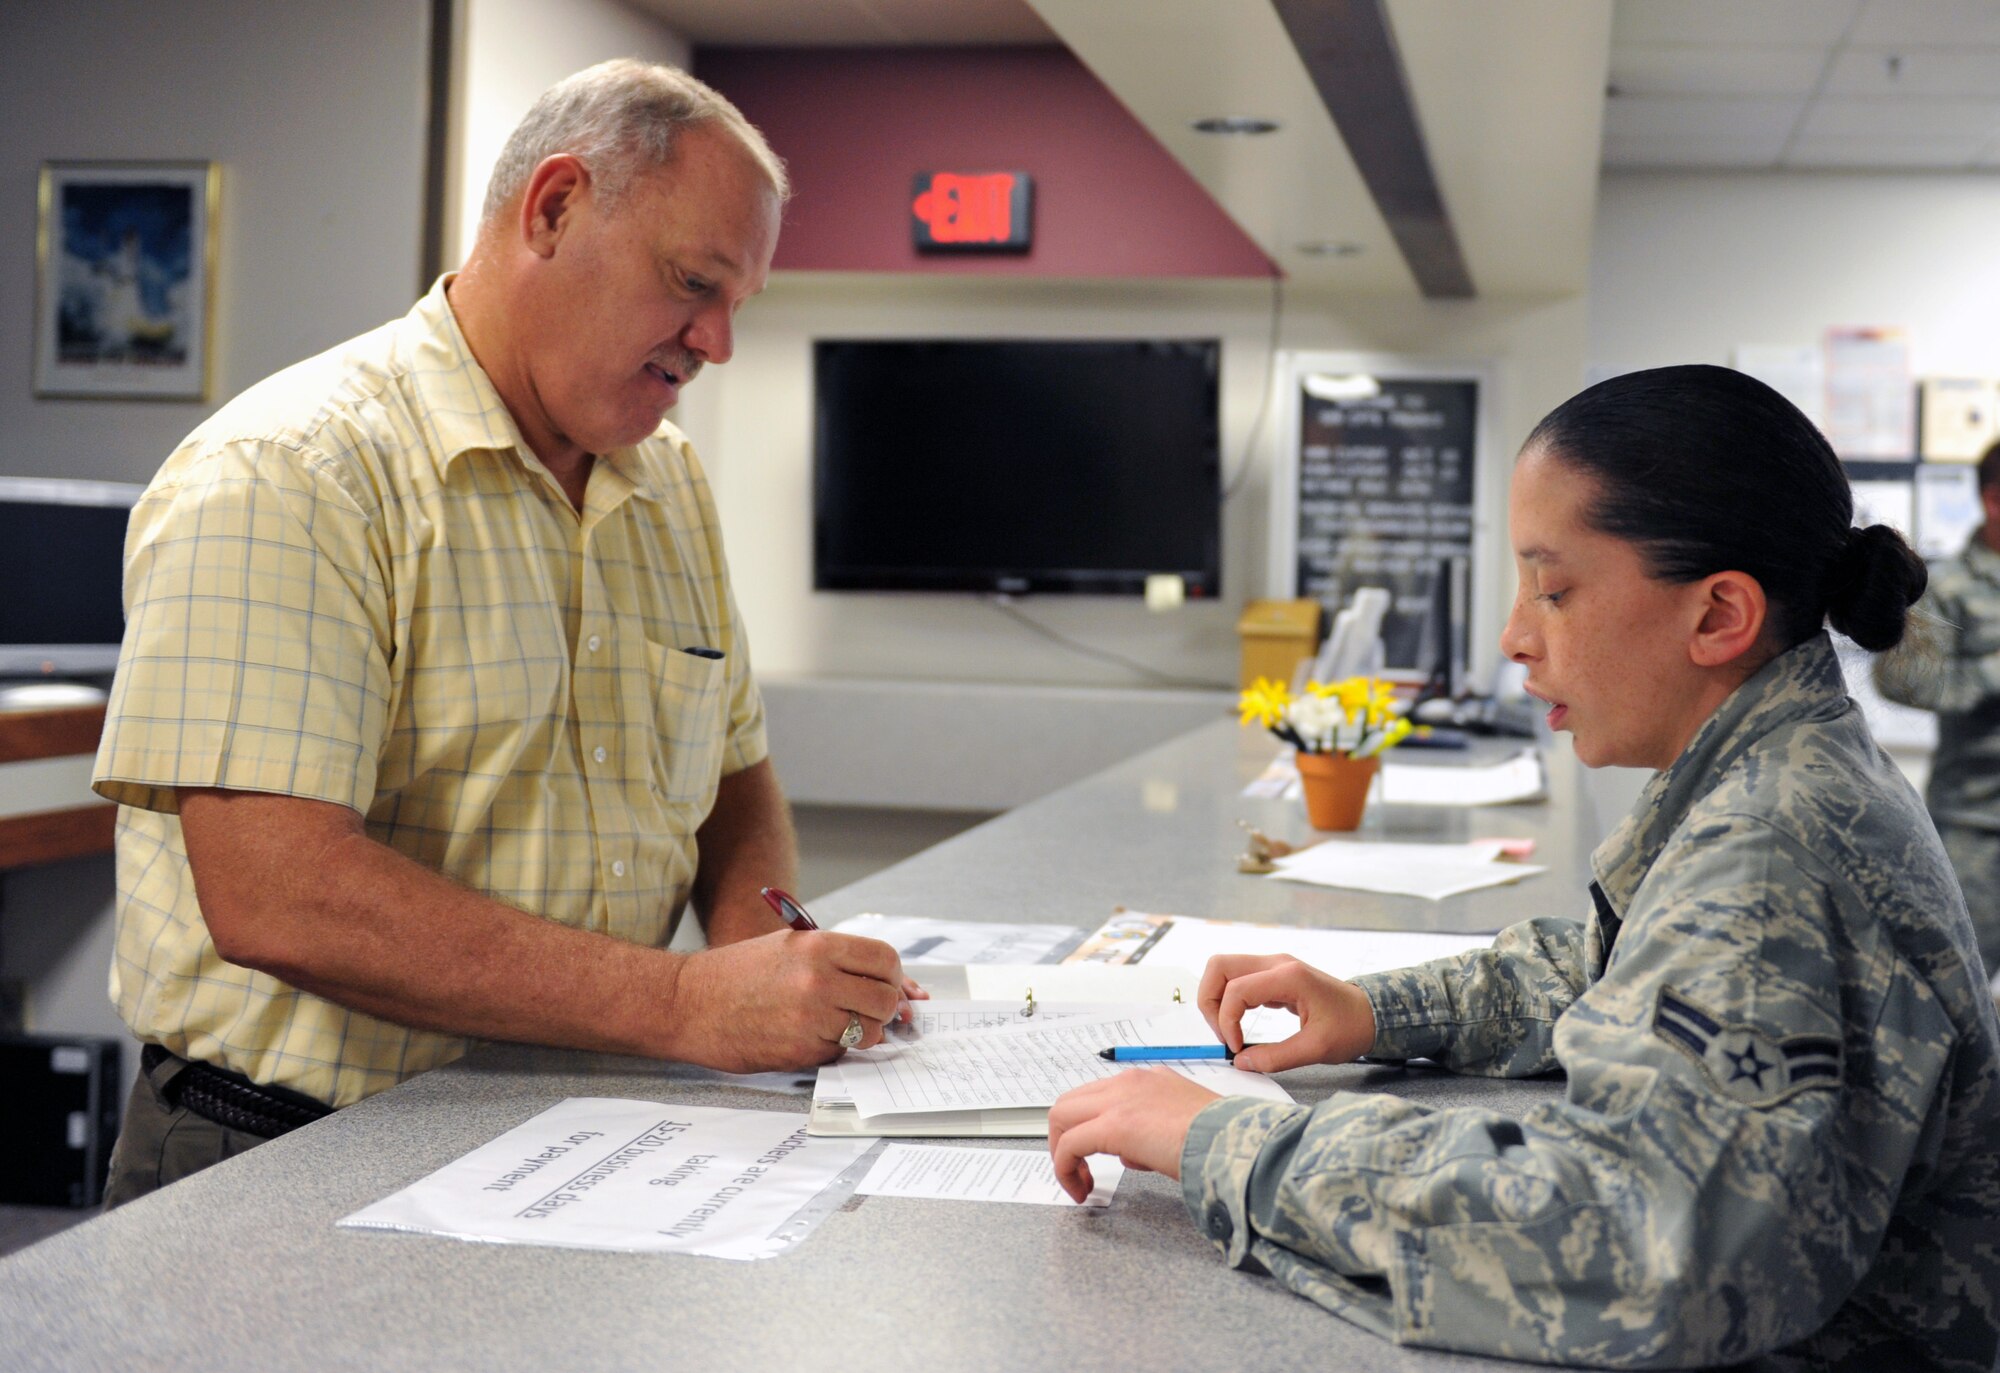 WHITEMAN AIR FORCE BASE, Mo. -- Airman 1st Class Melissa Malcolm, 509th Comptroller Squadron customer service representative, assists a customer with a travel voucher form. The 509th CPTS Financial Services Office provides a broad-based financial service to all service members and civilians, one of which is travel pay assistance. (U.S. Air Force photo/Heidi Hunt) (Released)